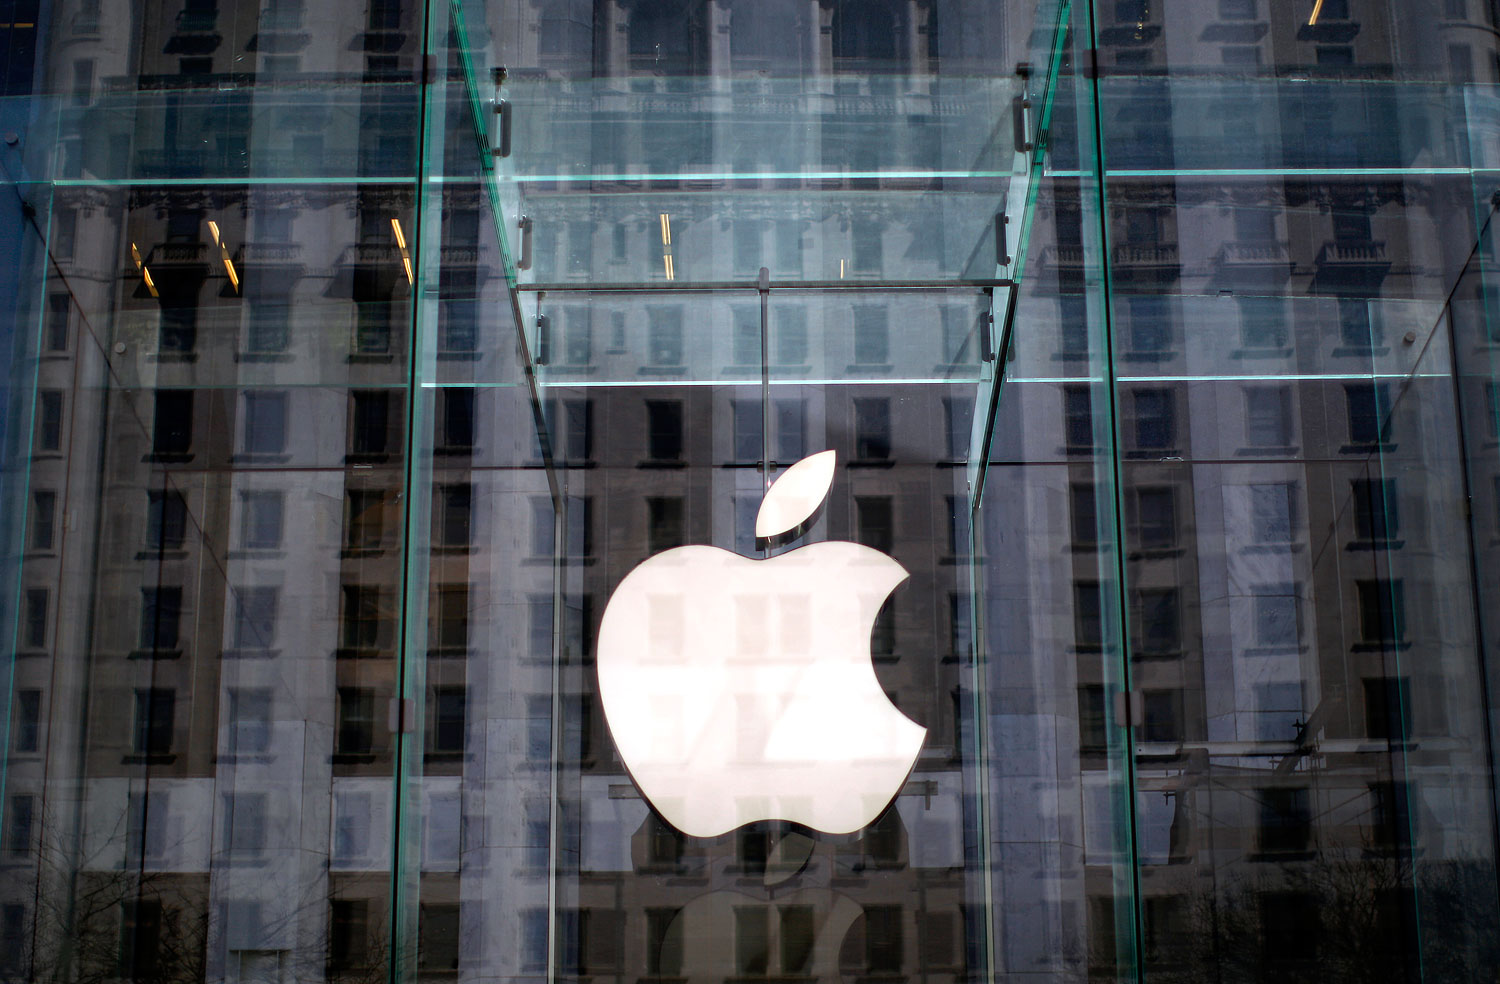 The Apple logo hangs inside the glass entrance to the Apple Store on 5th Avenue in New York City. (Mike Segar—Reuters)